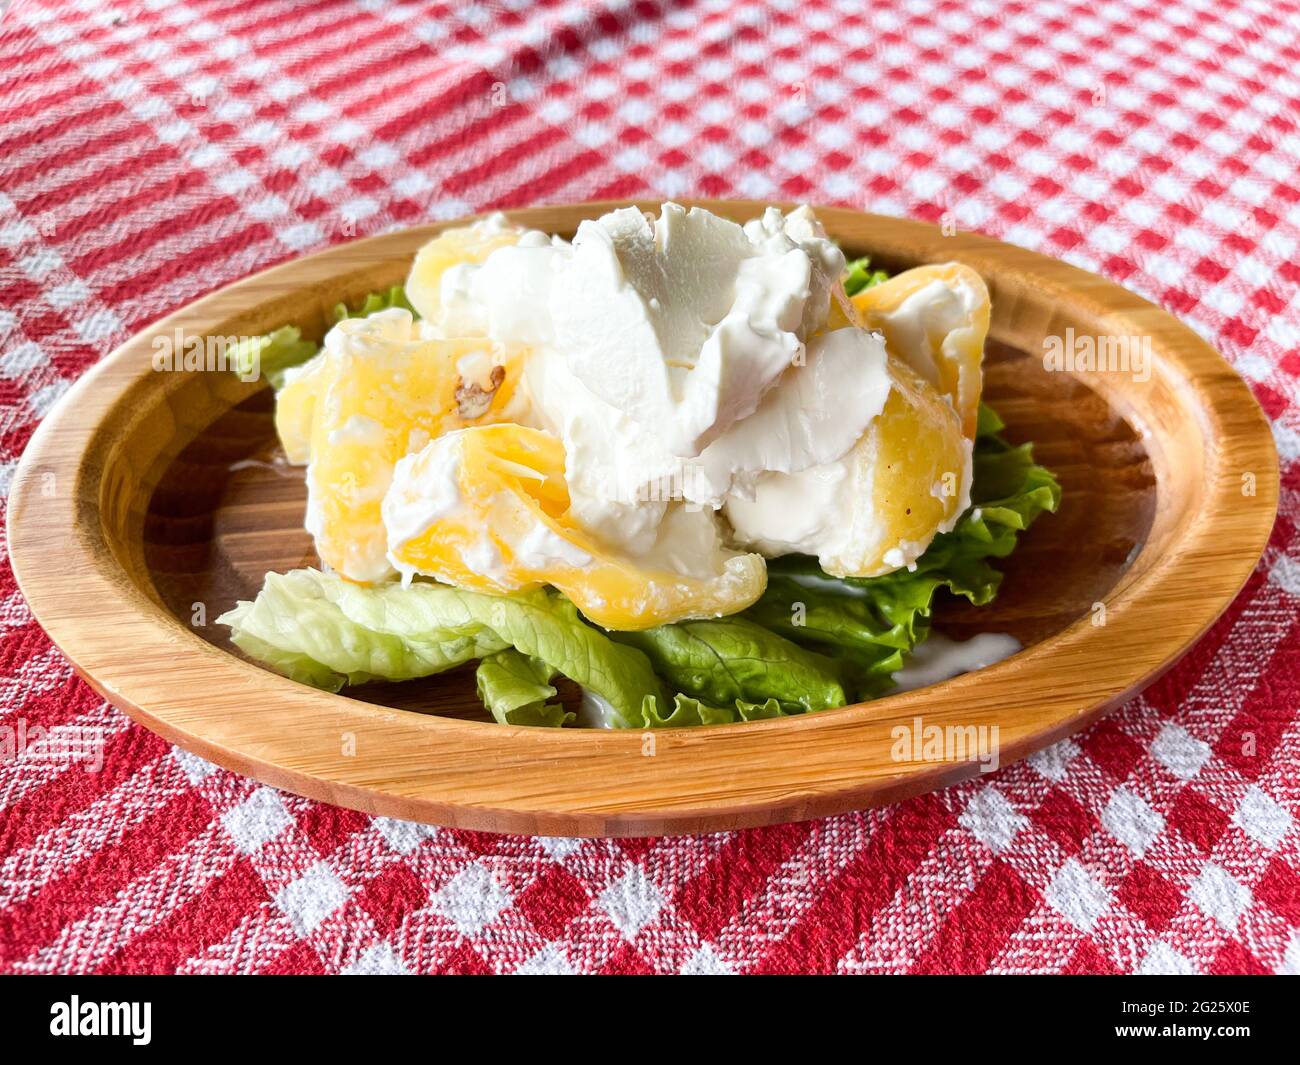 Albanian traditional food fresh peppers with sour cream. Stock Photo